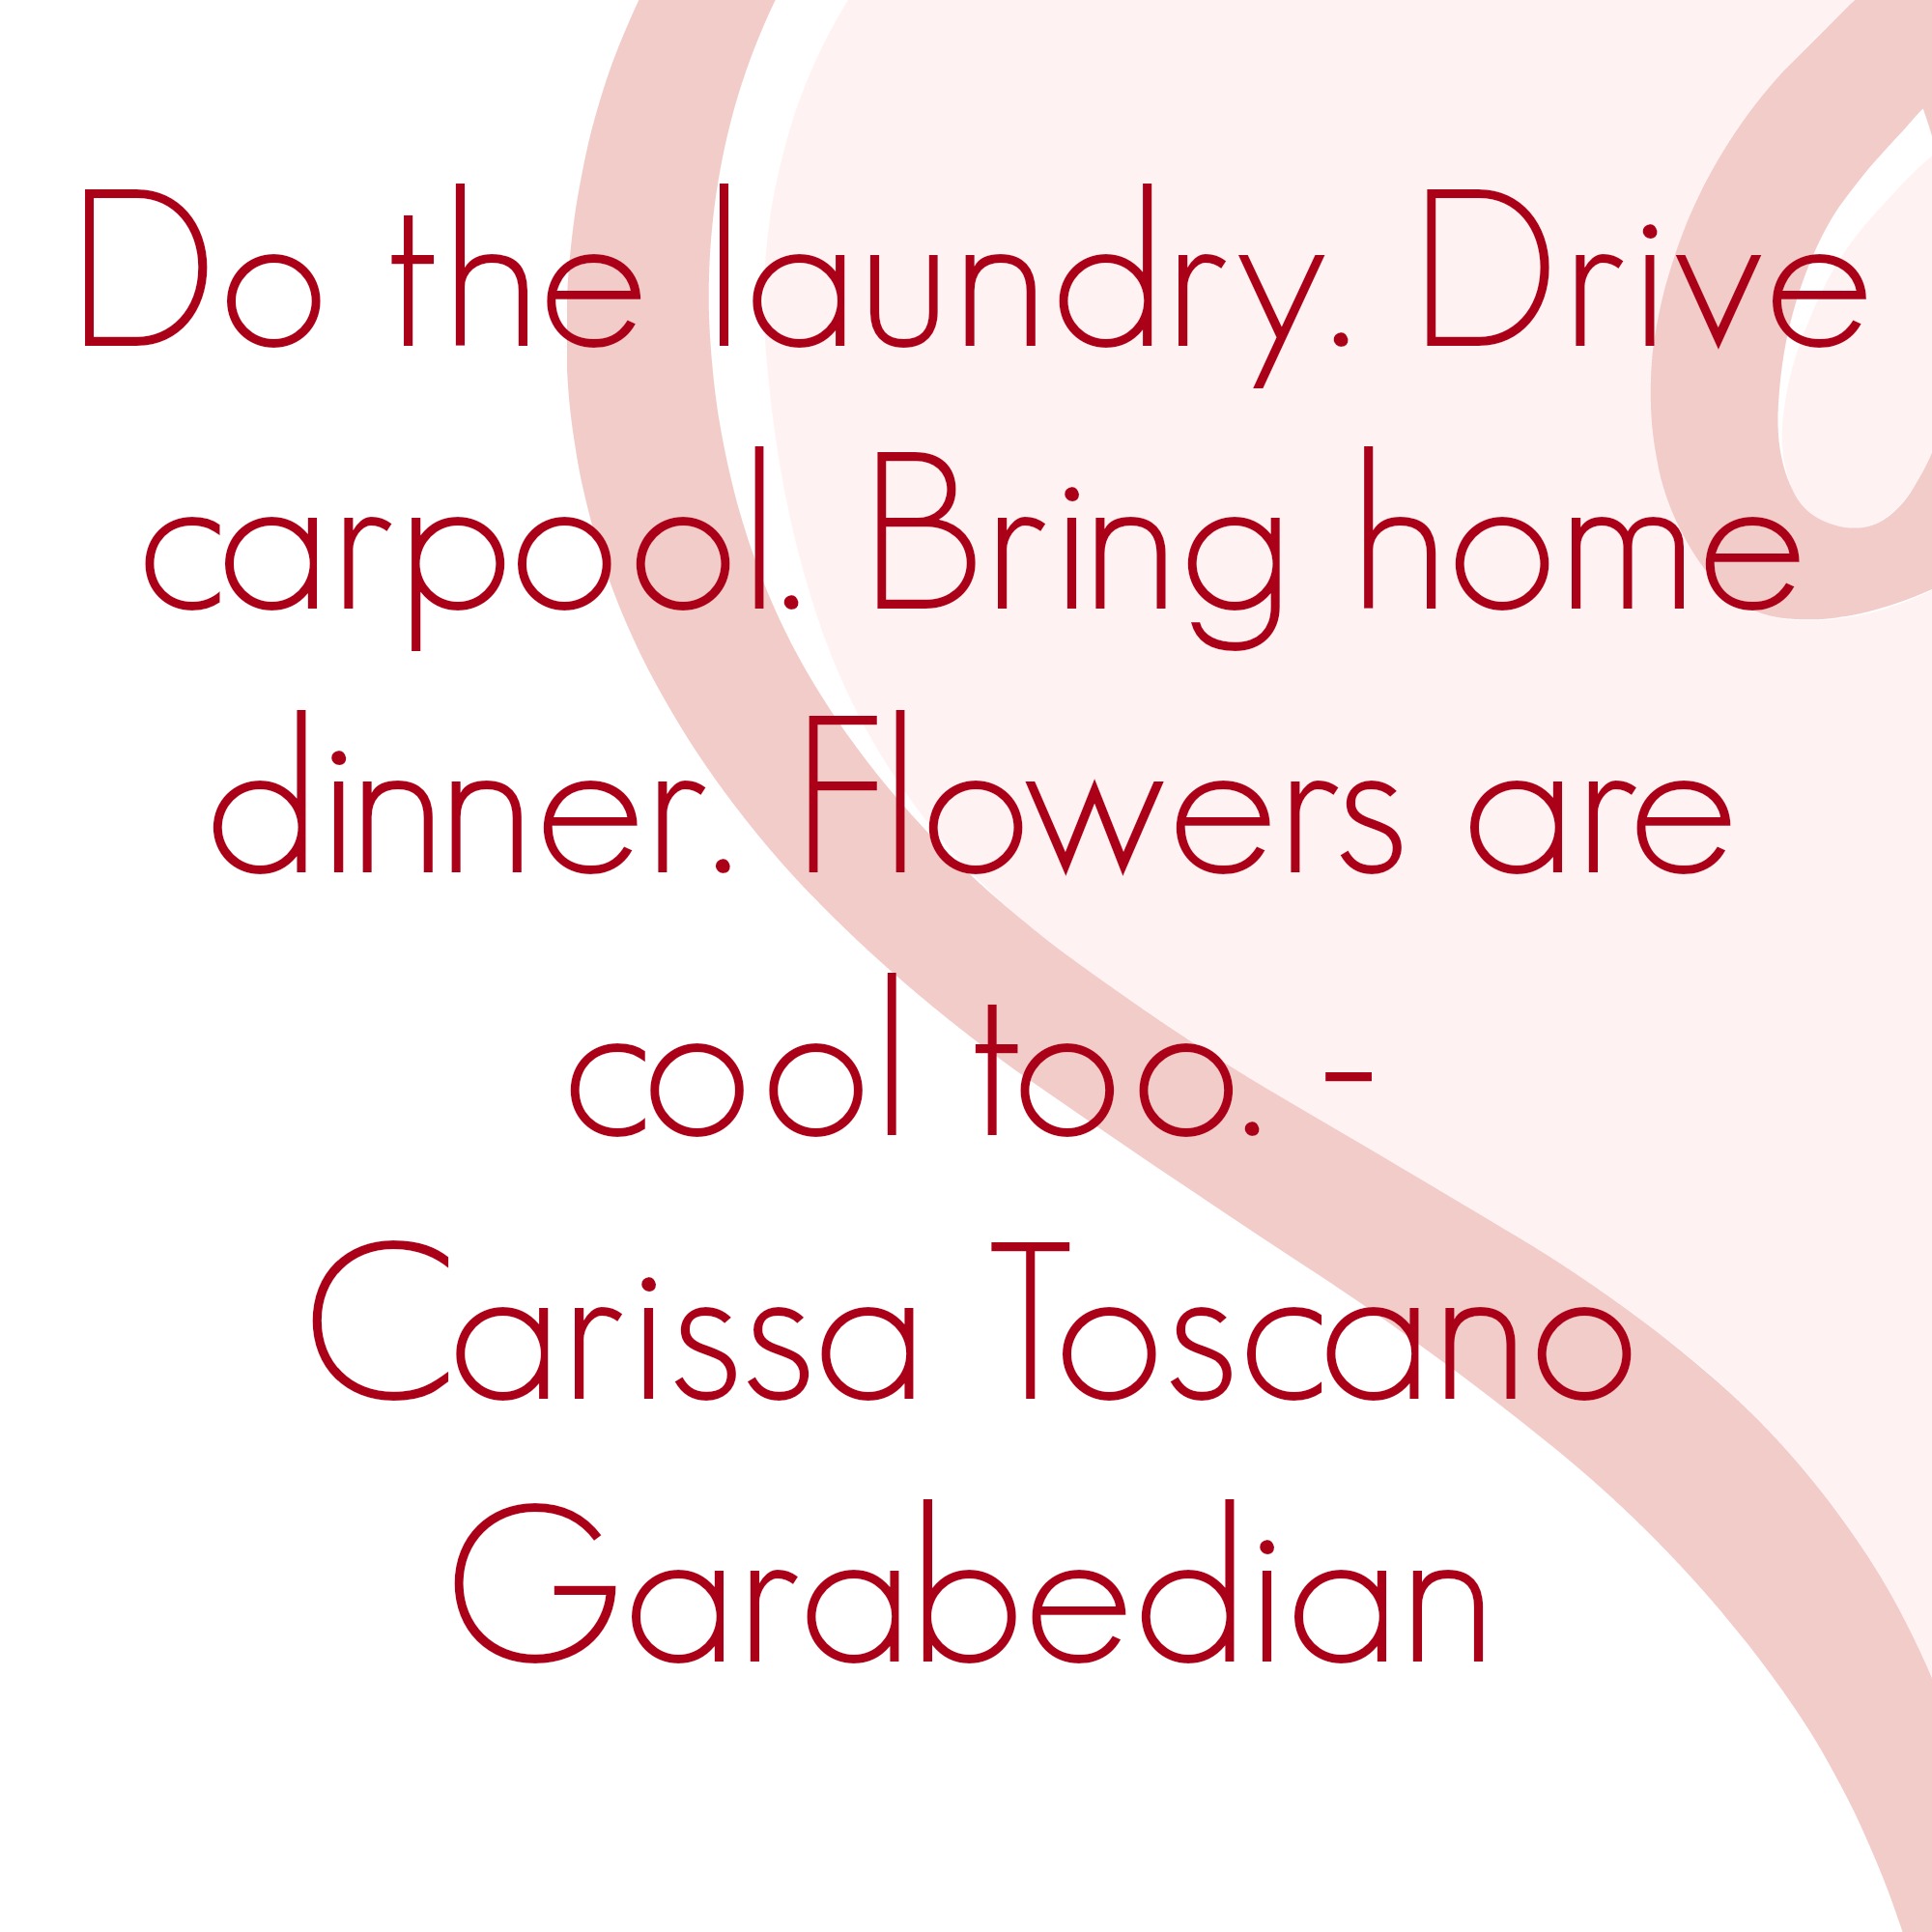 Do the laundry. Drive carpool. Bring home dinner. Flowers are cool too.